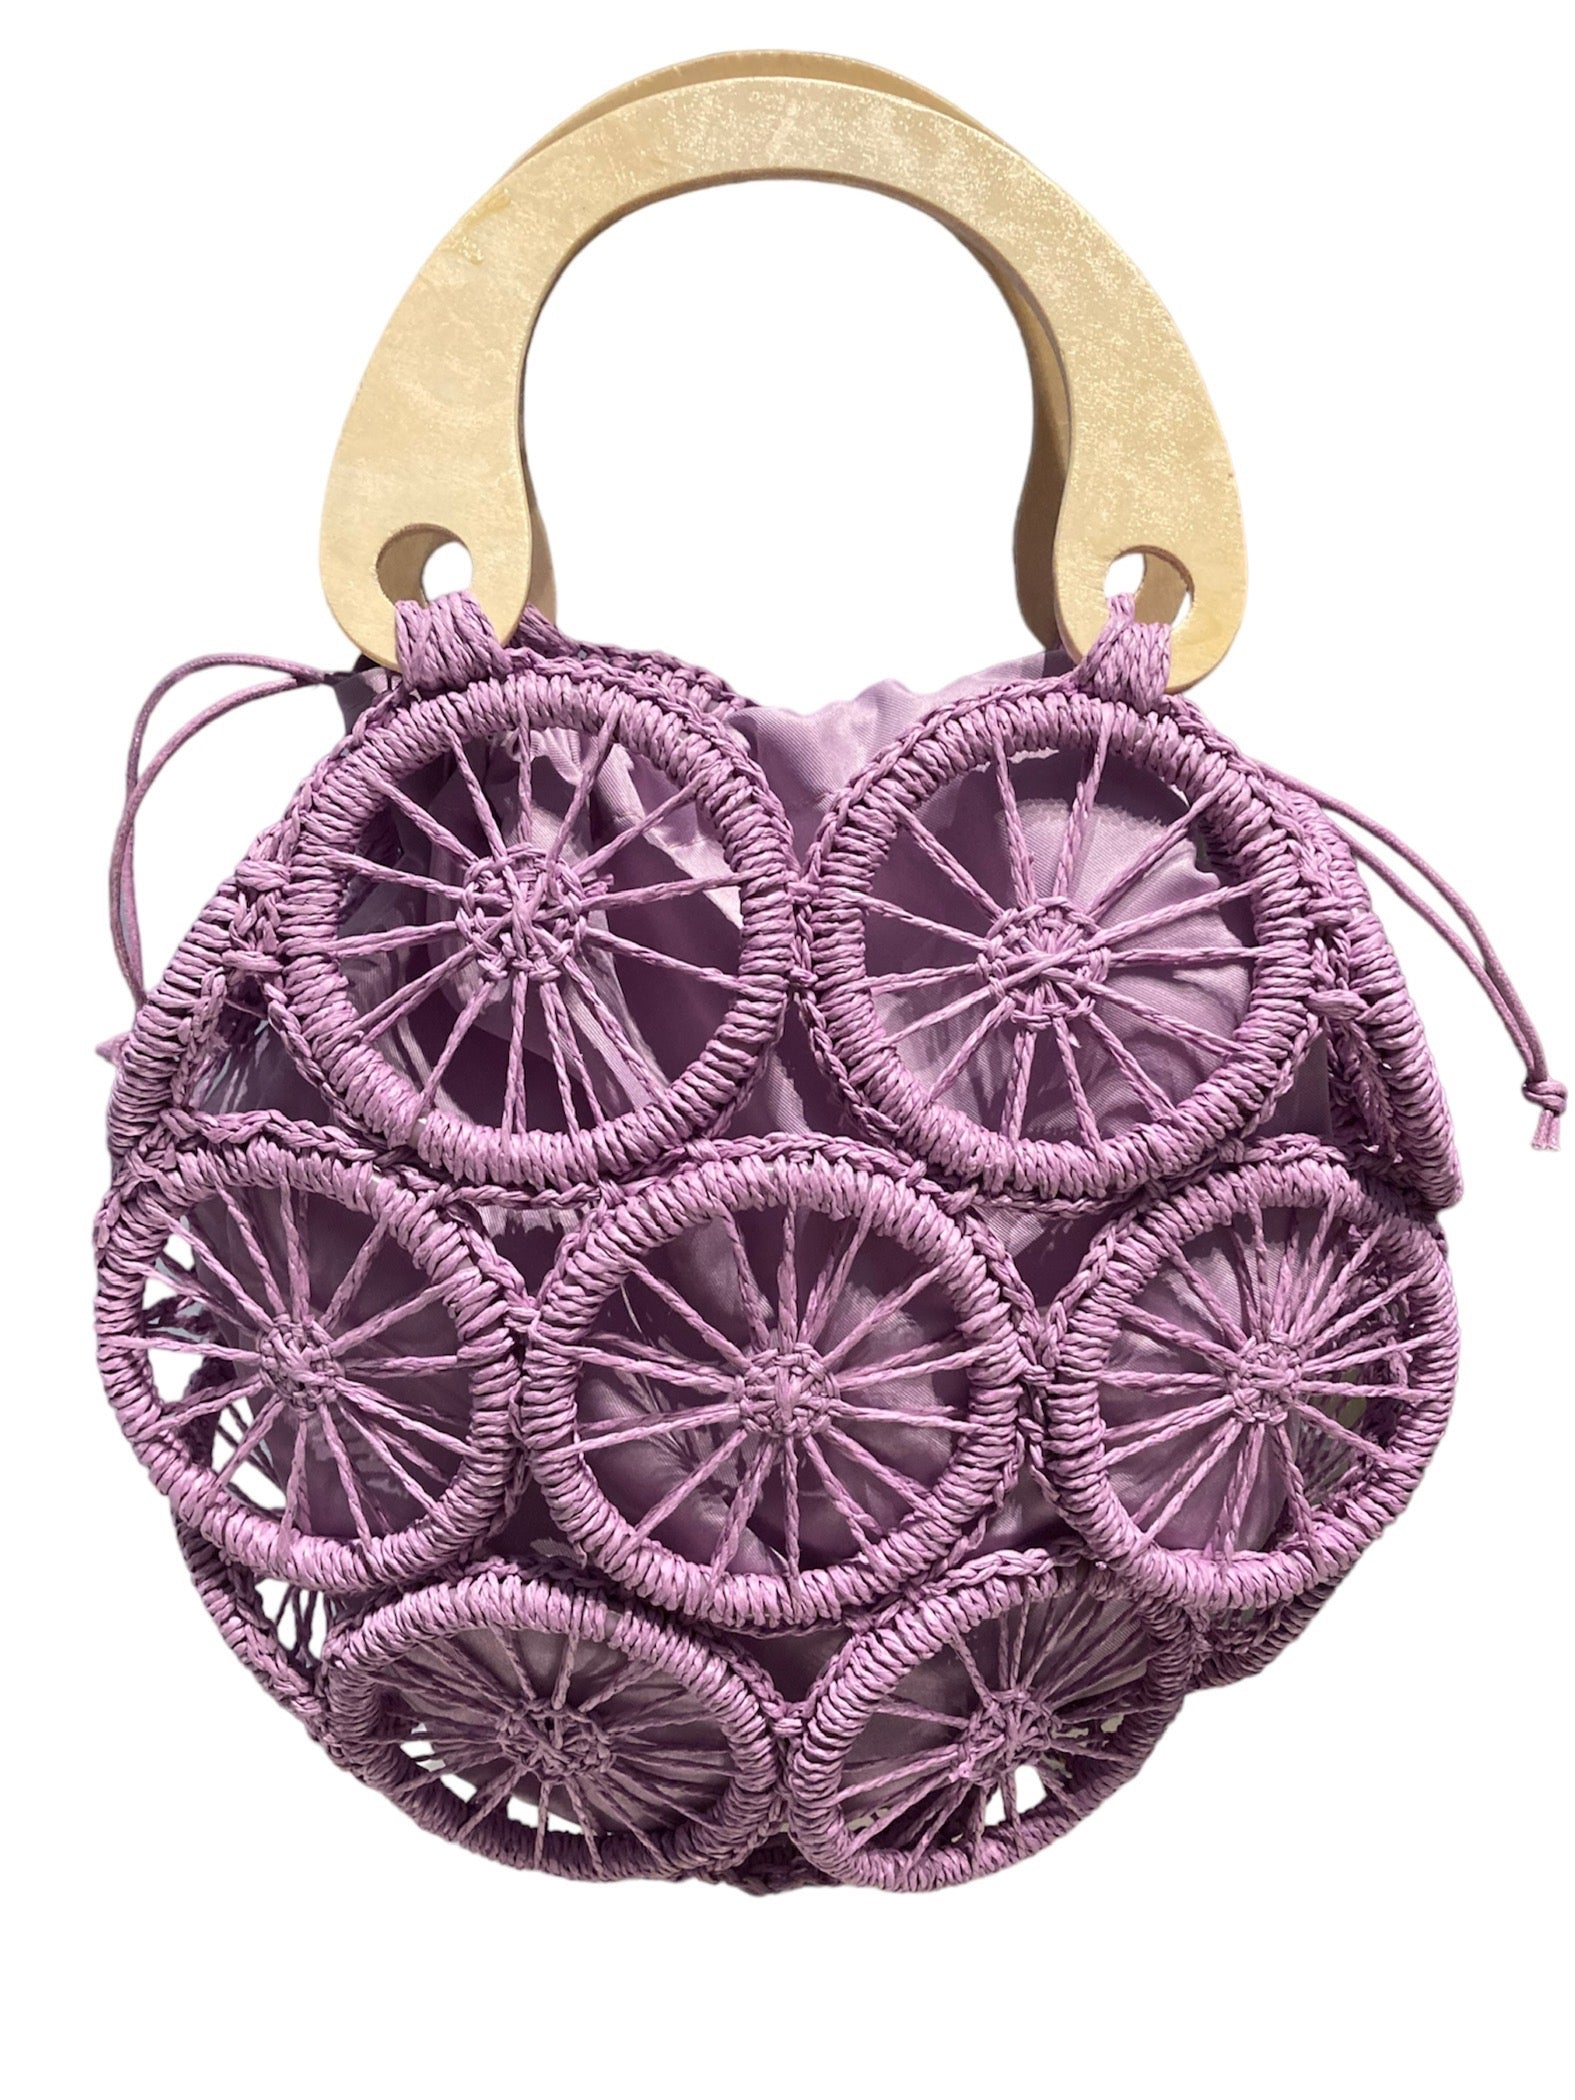 Crochet Ring Bag with Inner Pouch 